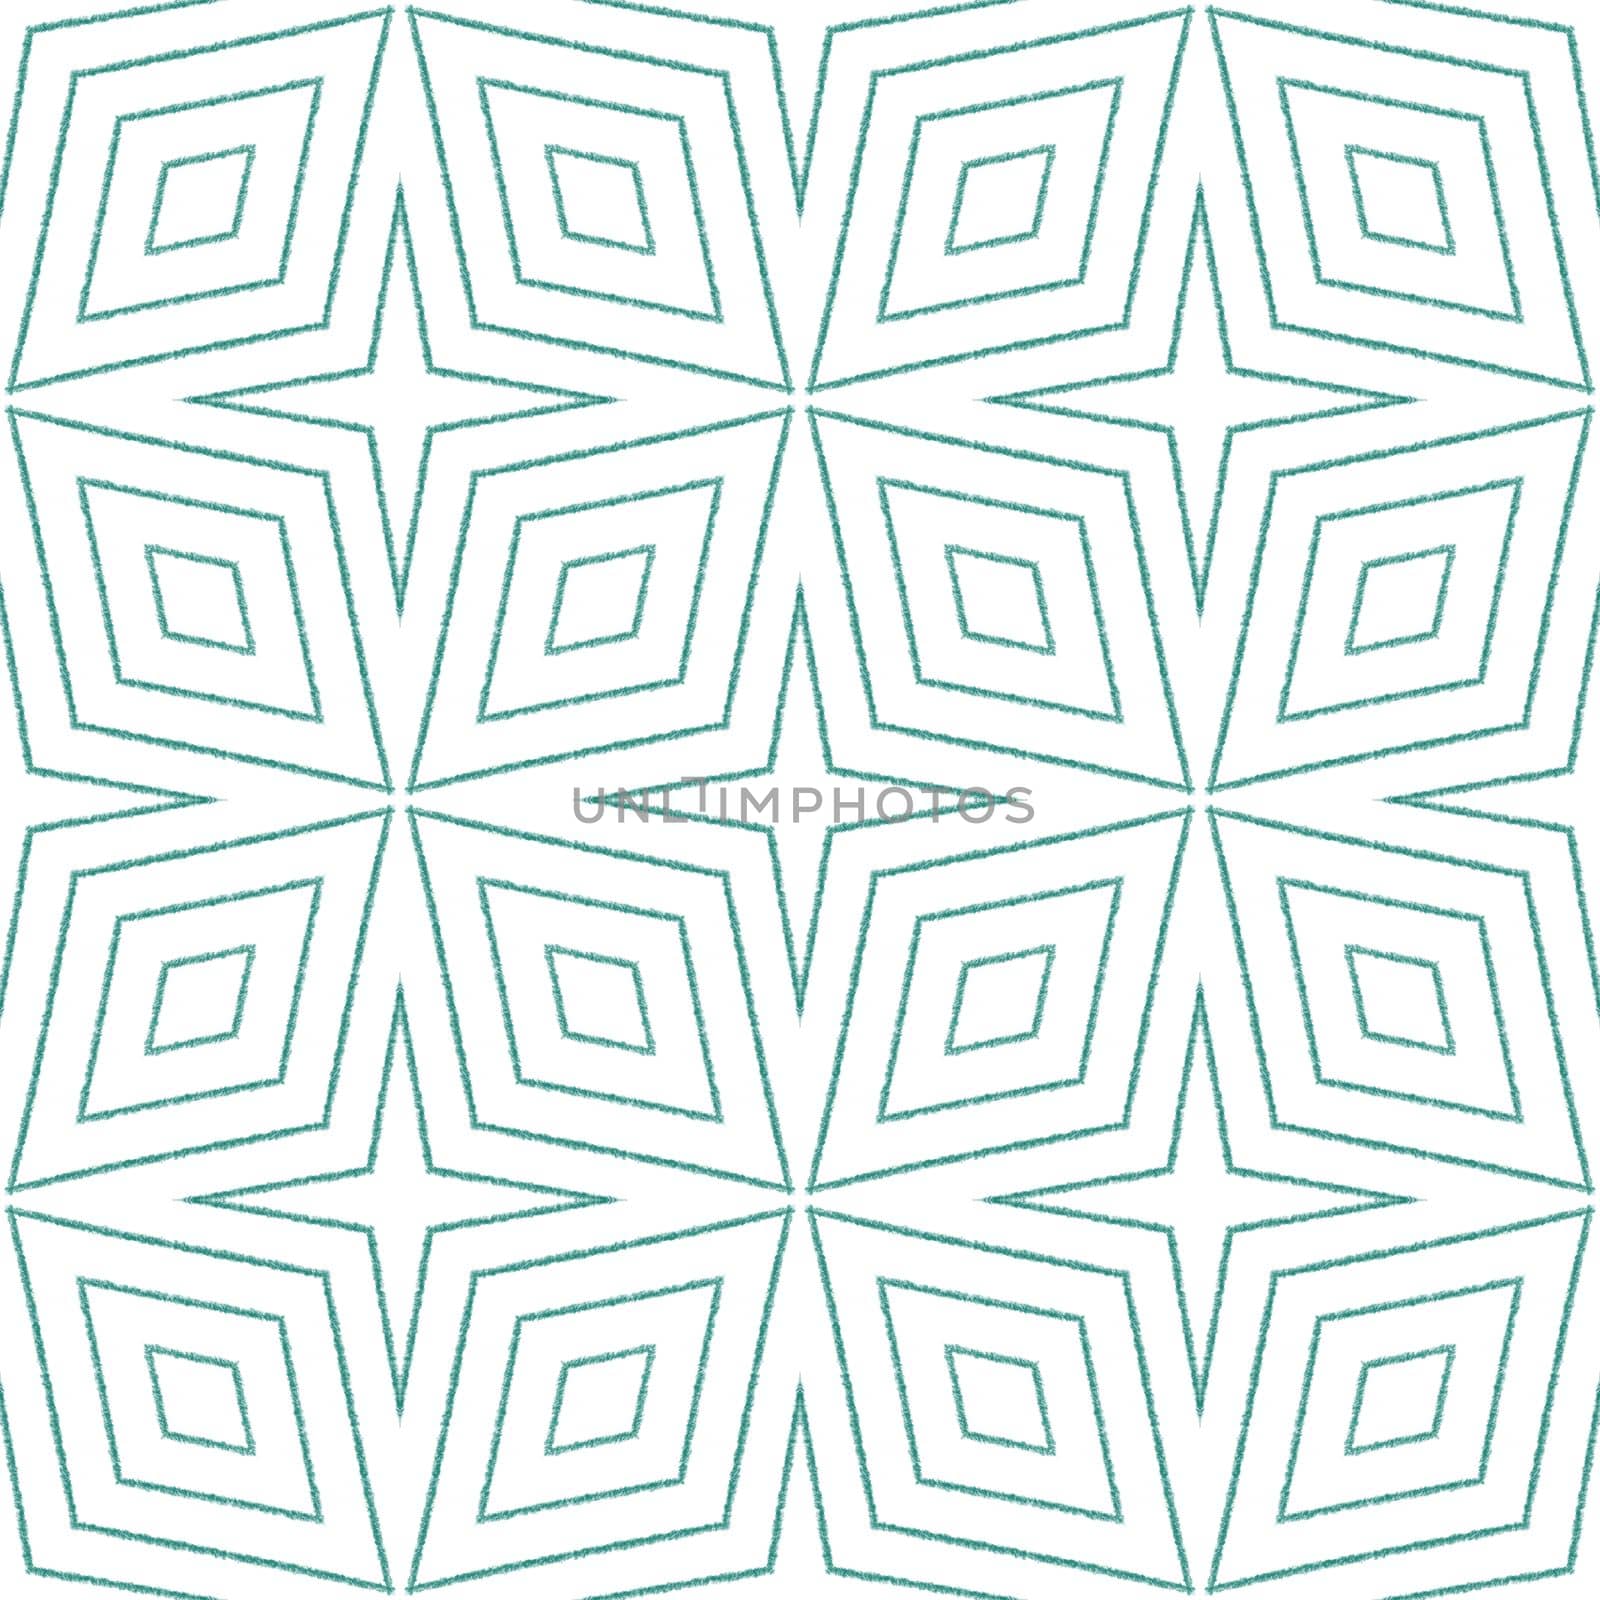 Mosaic seamless pattern. Turquoise symmetrical by beginagain